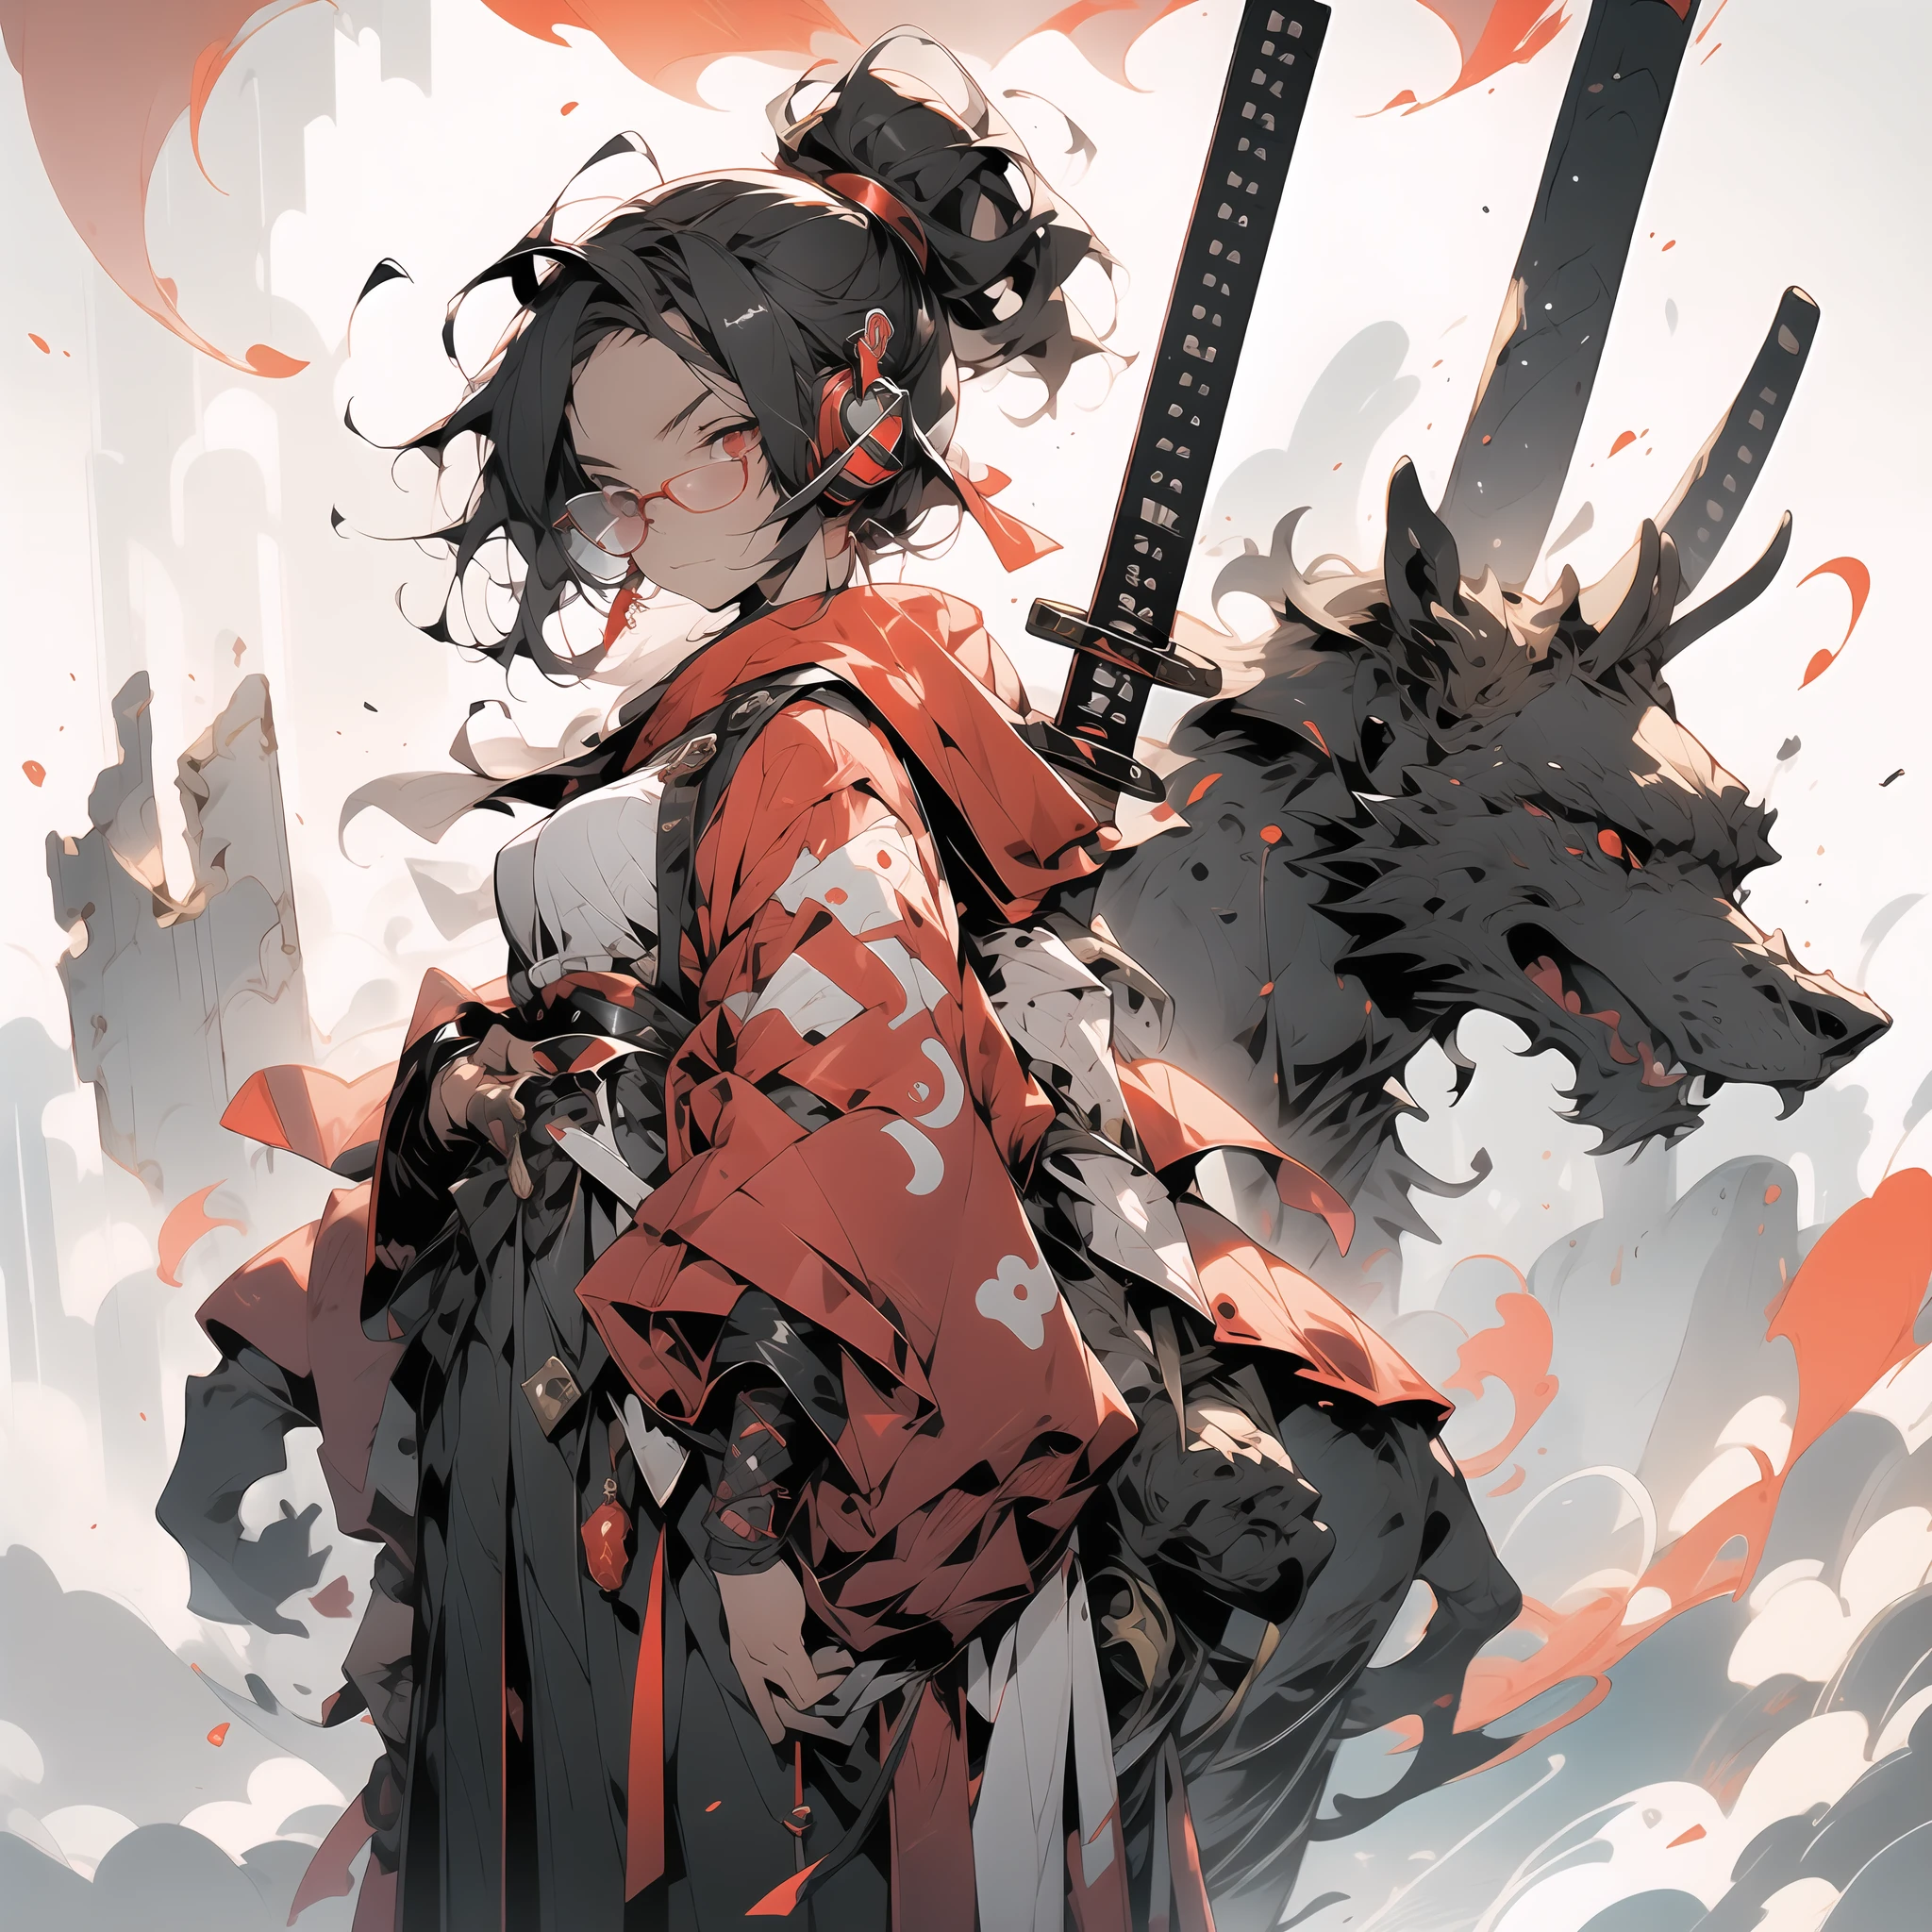 Imagine a young girl with black hair, short hair, and red eyes. She wears headphones and glasses while dressed in a combination of a traditional shrine maiden outfit and samurai armor, complete with a mini skirt. Despite her serious appearance and lack of expression, her red eyes gleam with mysterious power. Picture her standing amidst the ruins, accompanied by various mythical creatures. Now, tell a captivating story about her adventures in this intriguing world.